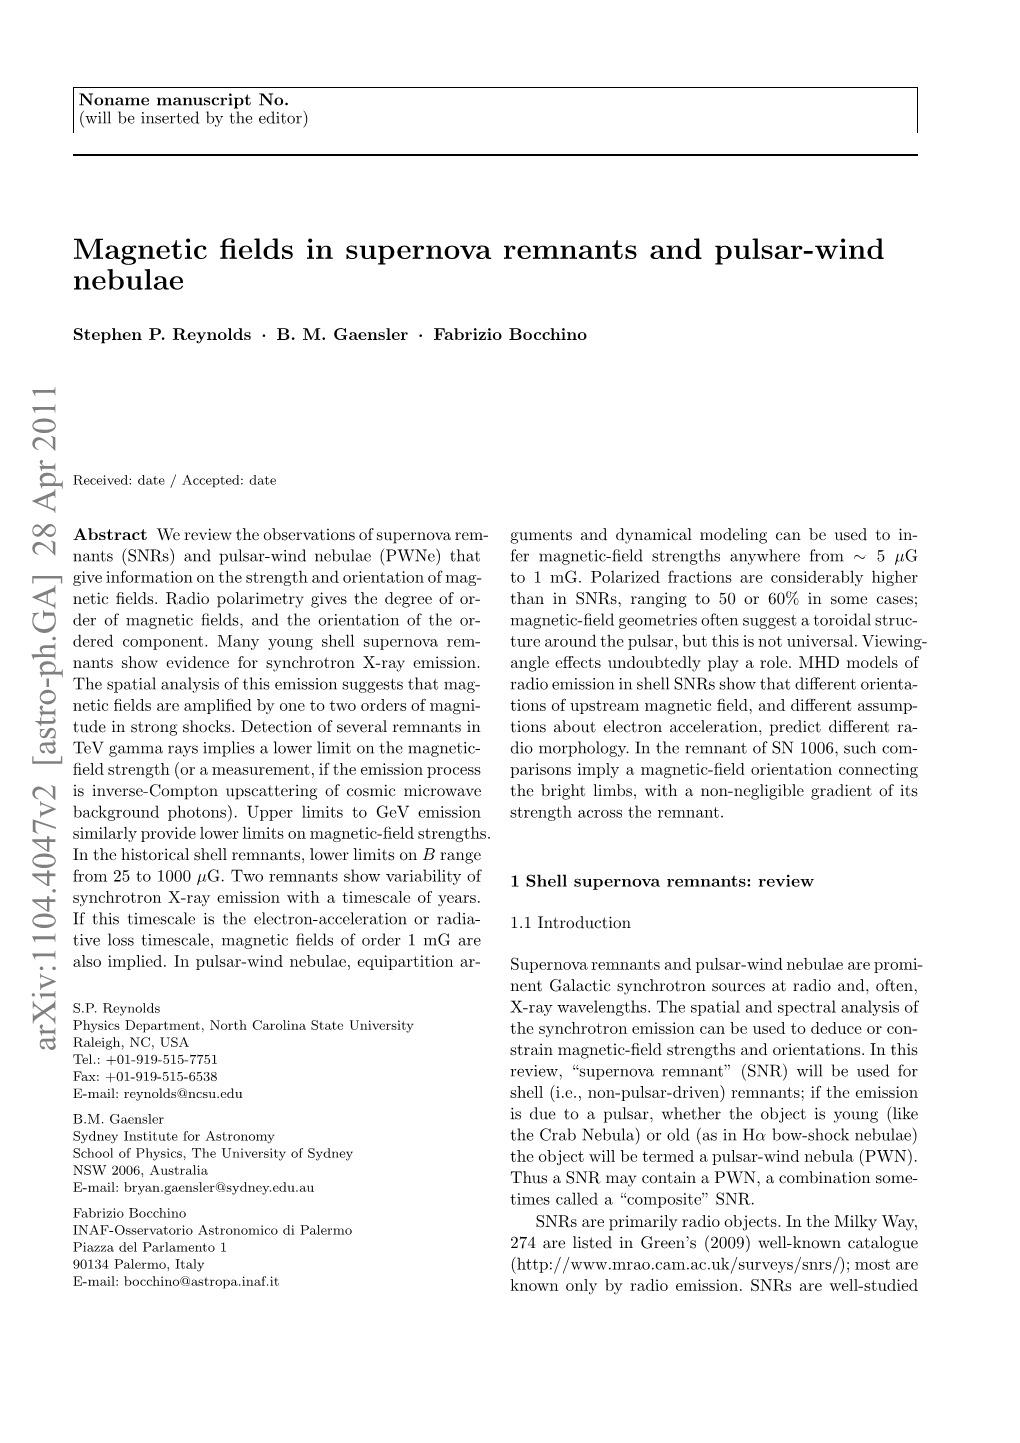 Magnetic Fields in Supernova Remnants and Pulsar-Wind Nebulae